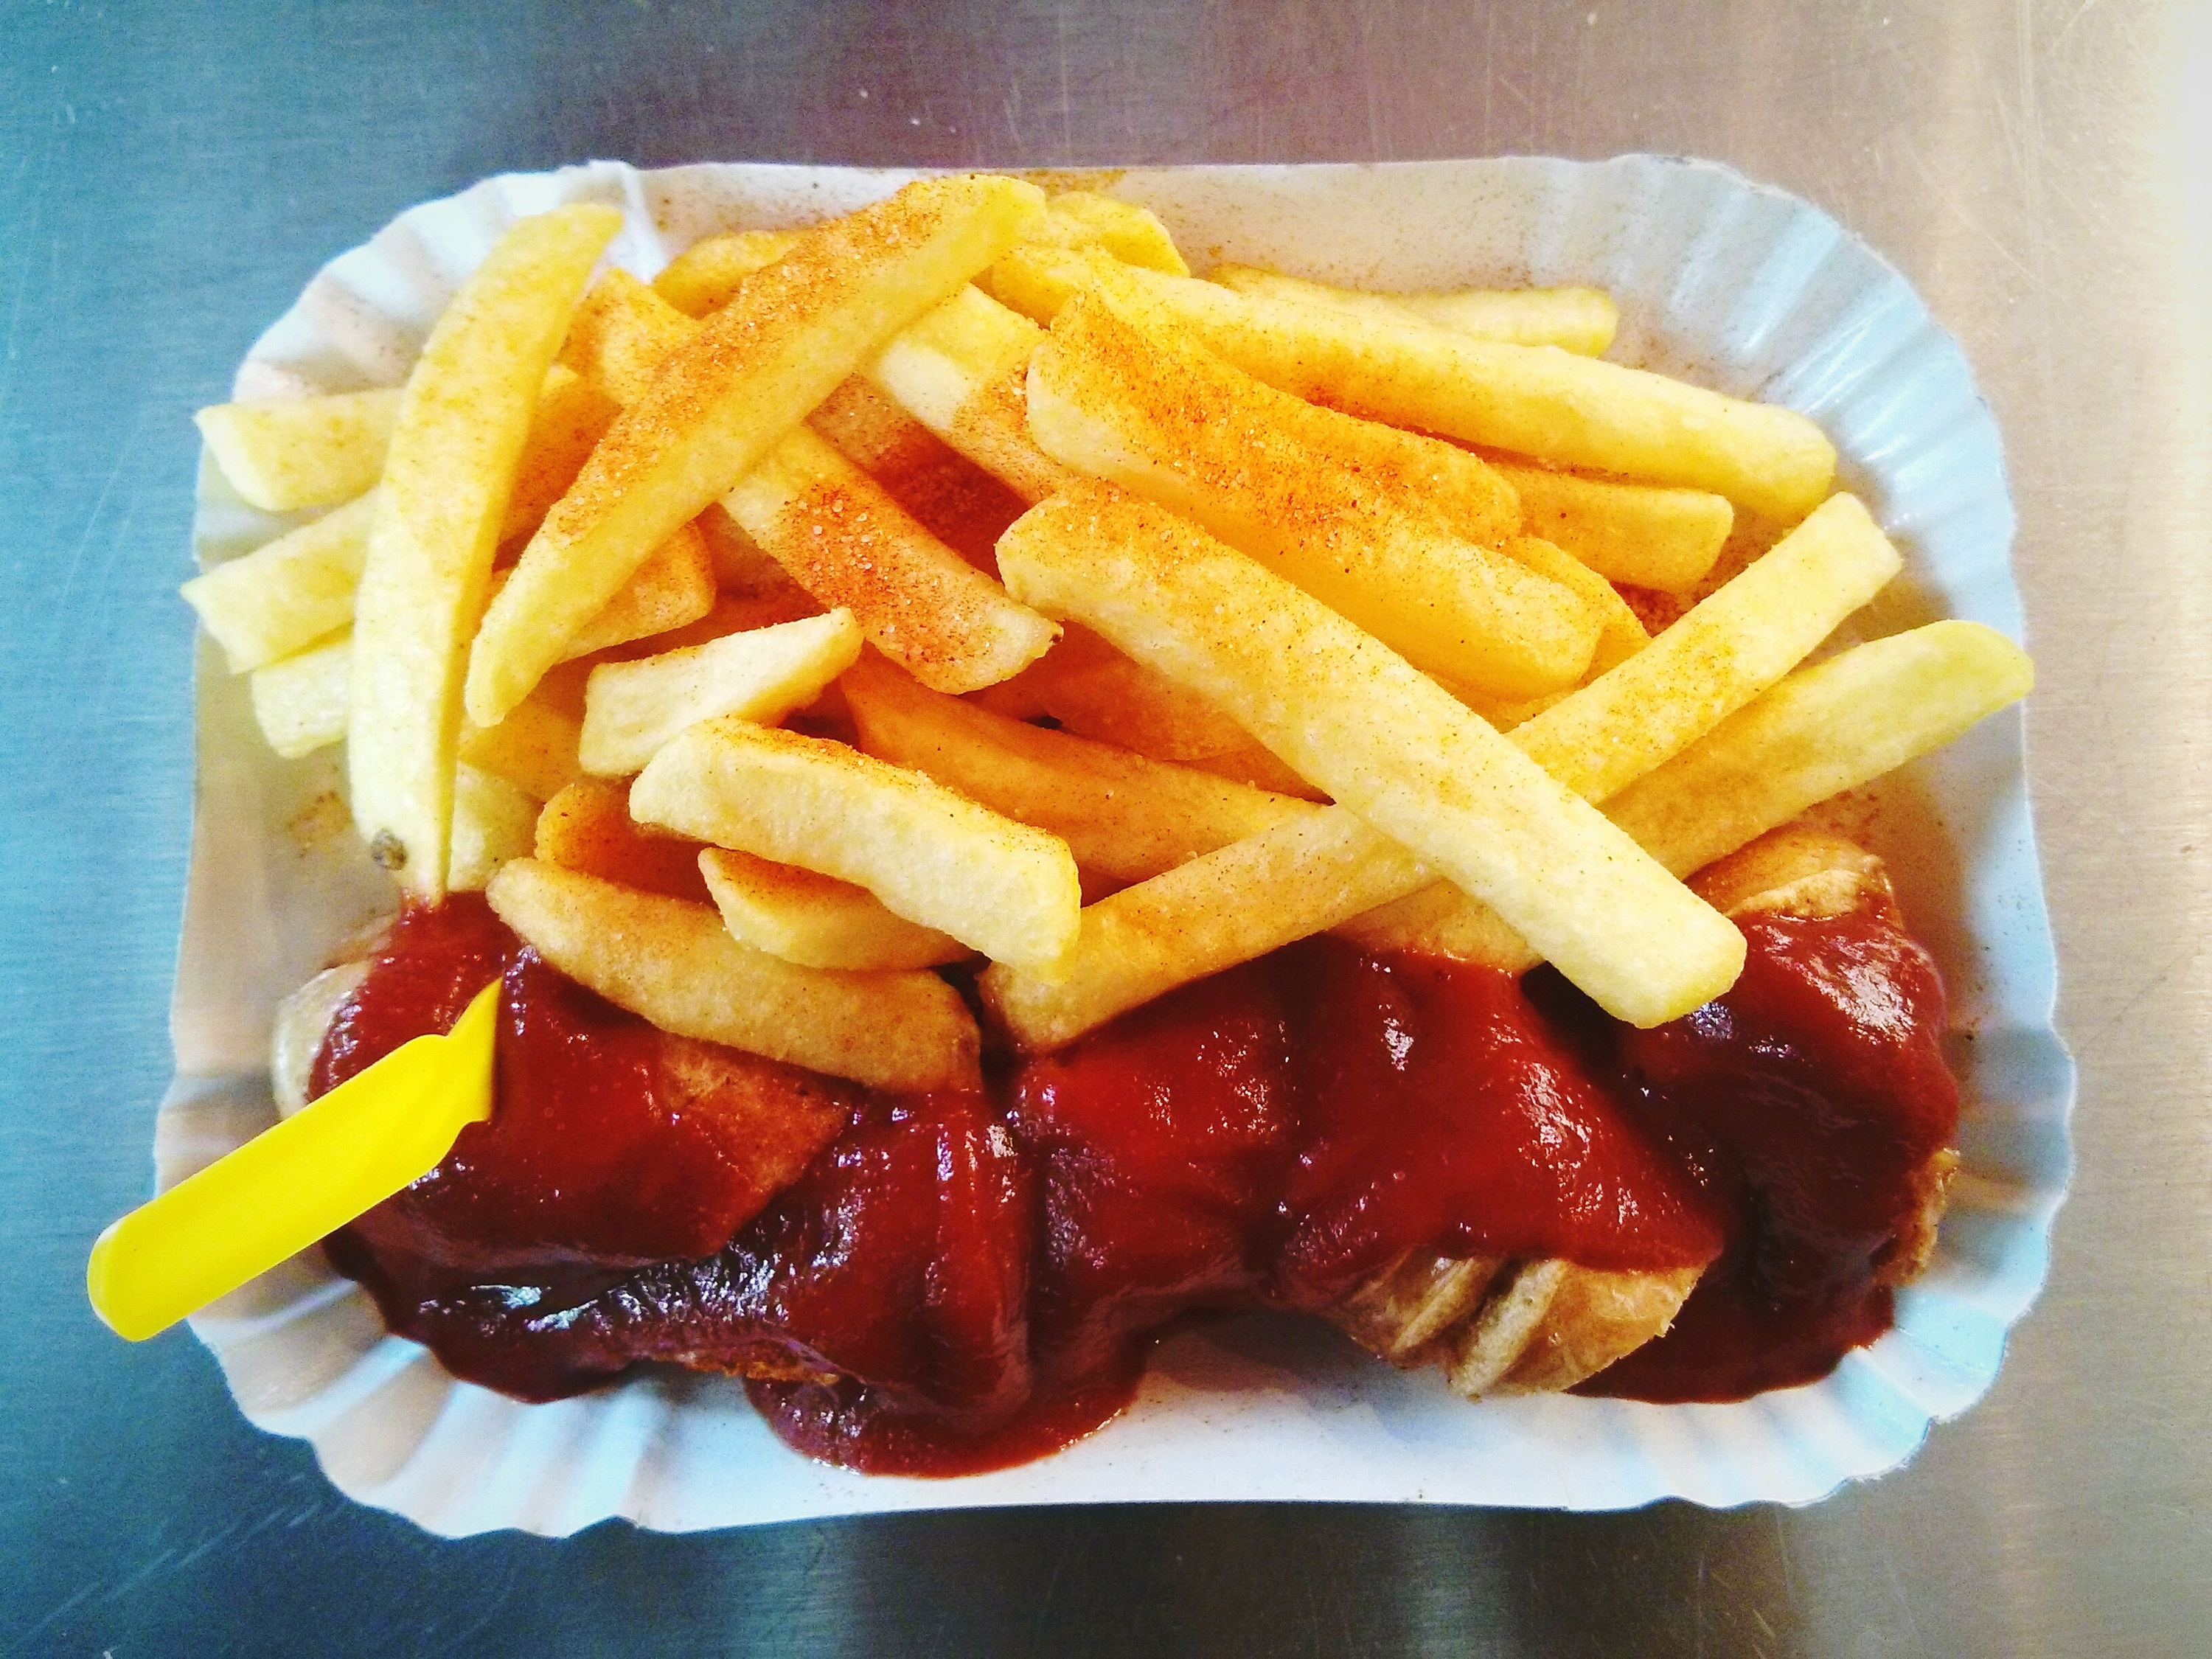 Currywurst and French fries.